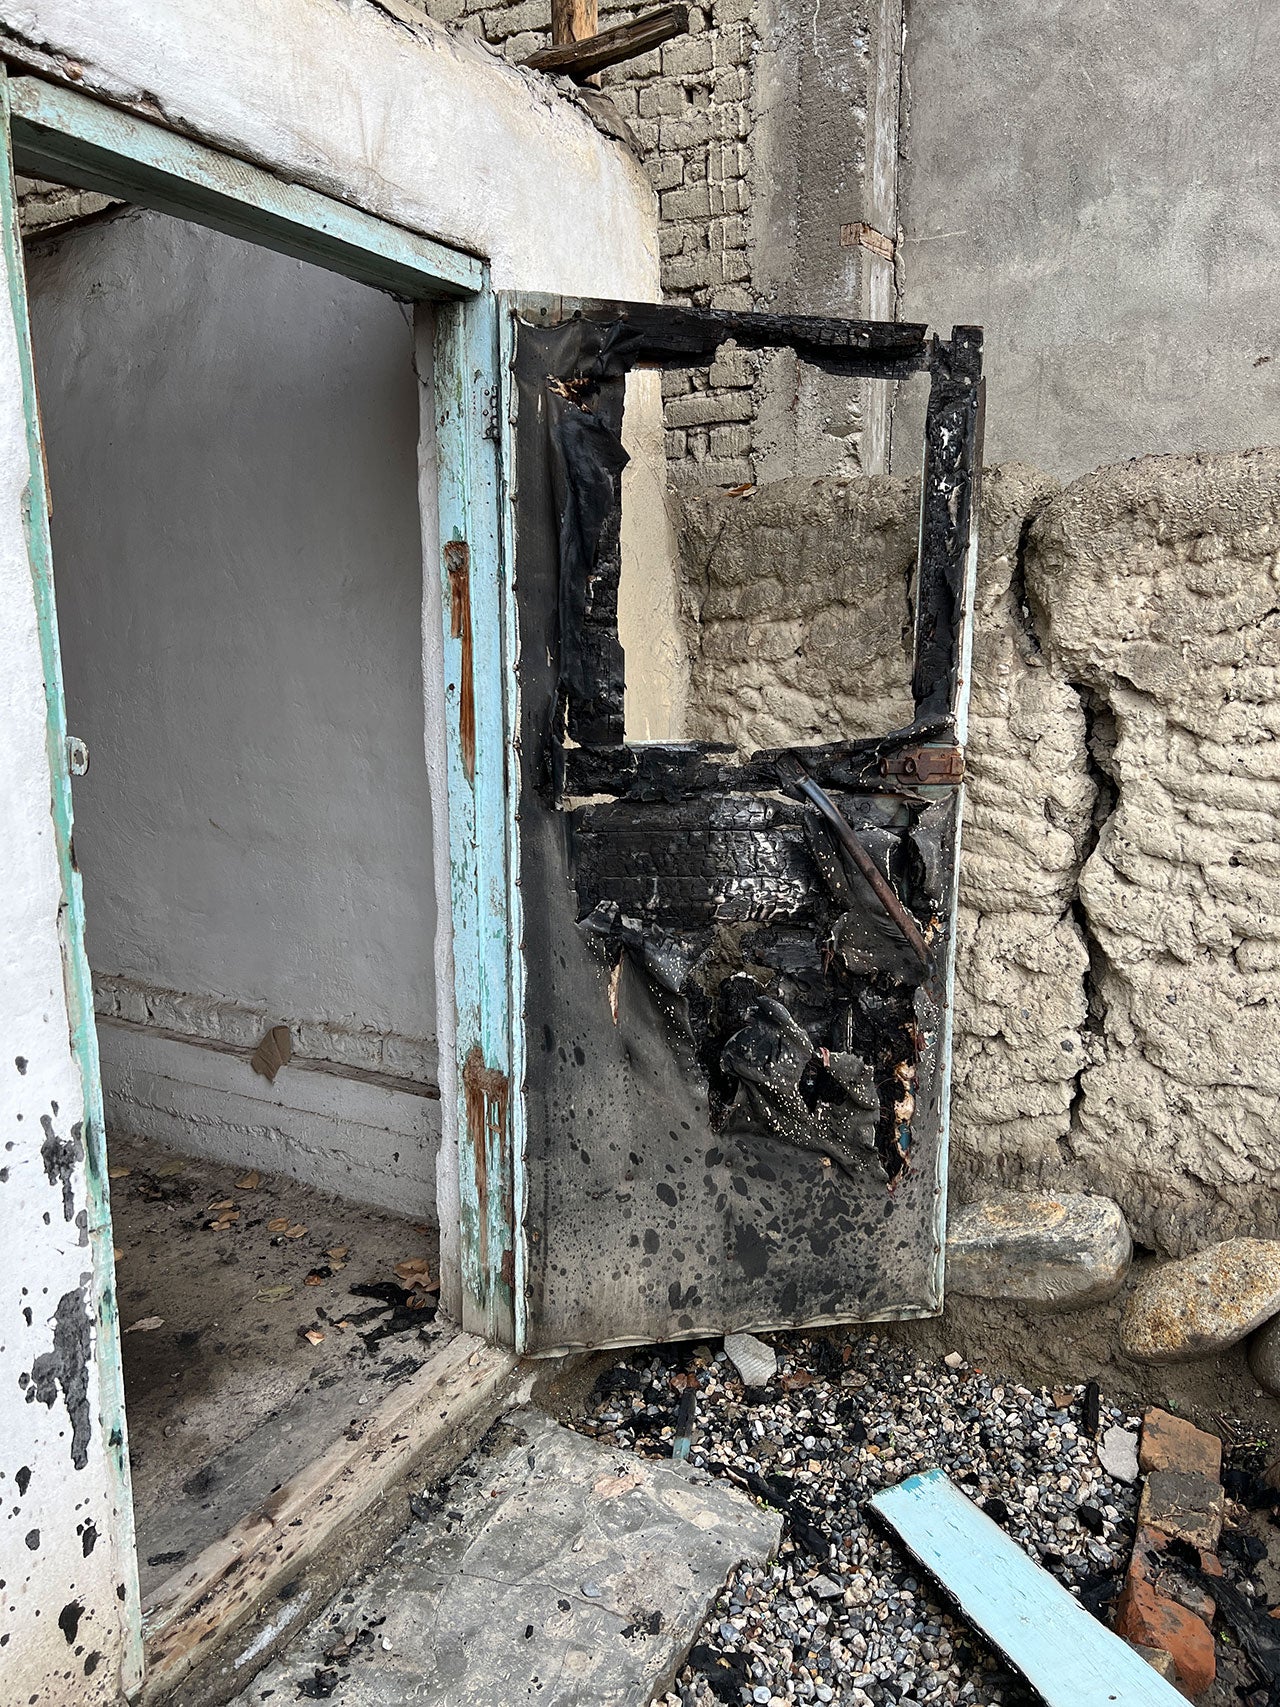 Fire damage on an outdoor toilet in the Kyrgyz village of Dostuk (Batken district). The village was completely destroyed by fire  while briefly under the control of Tajik forces on September 16, 2022.